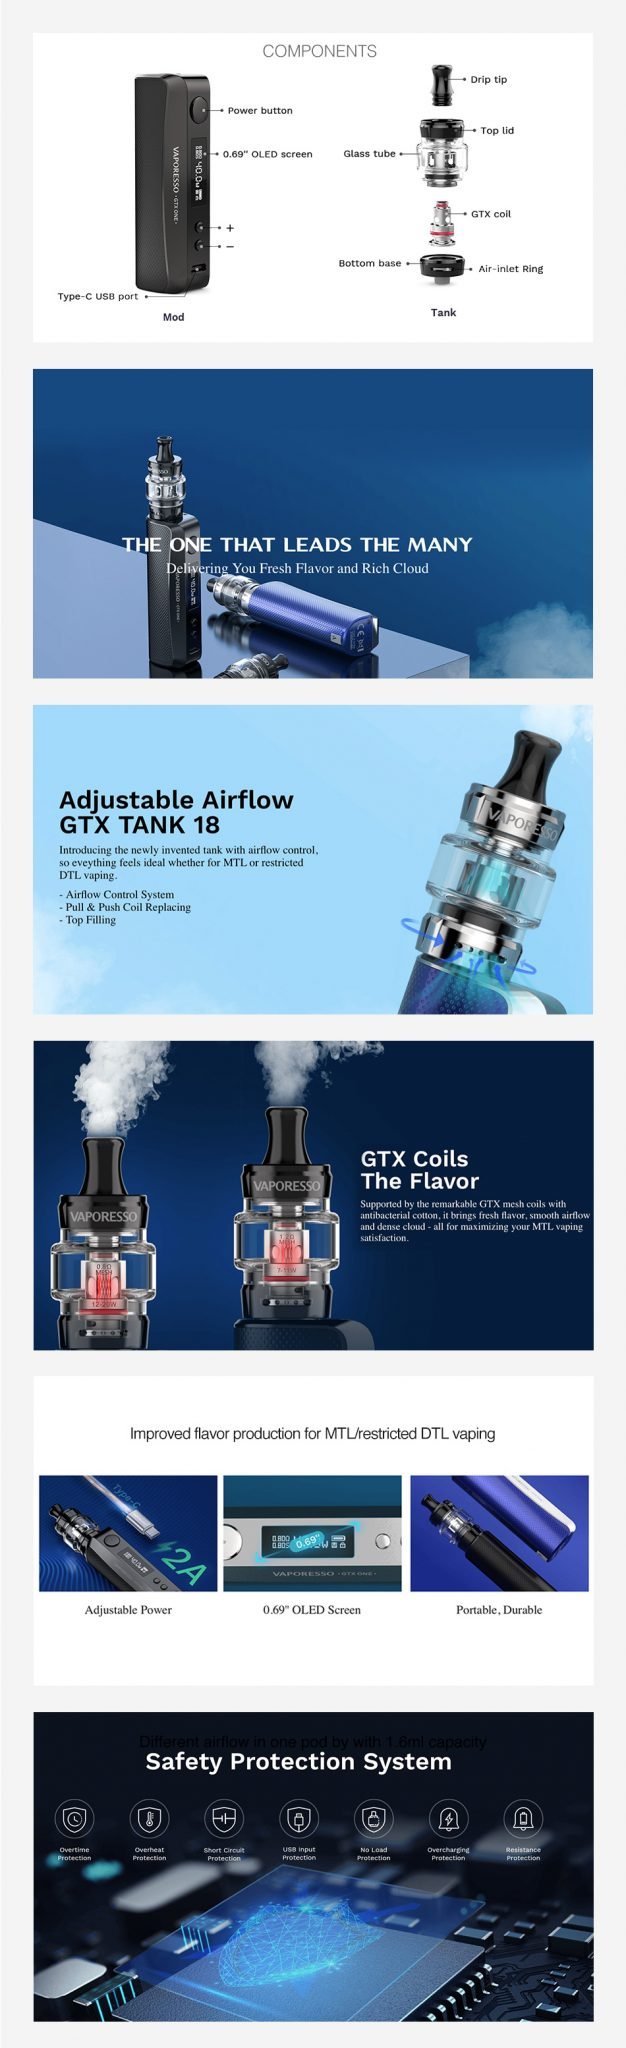 Vaporesso-GTX-One-40W-VW-Kit-with-GTX-Tank-Features-UK